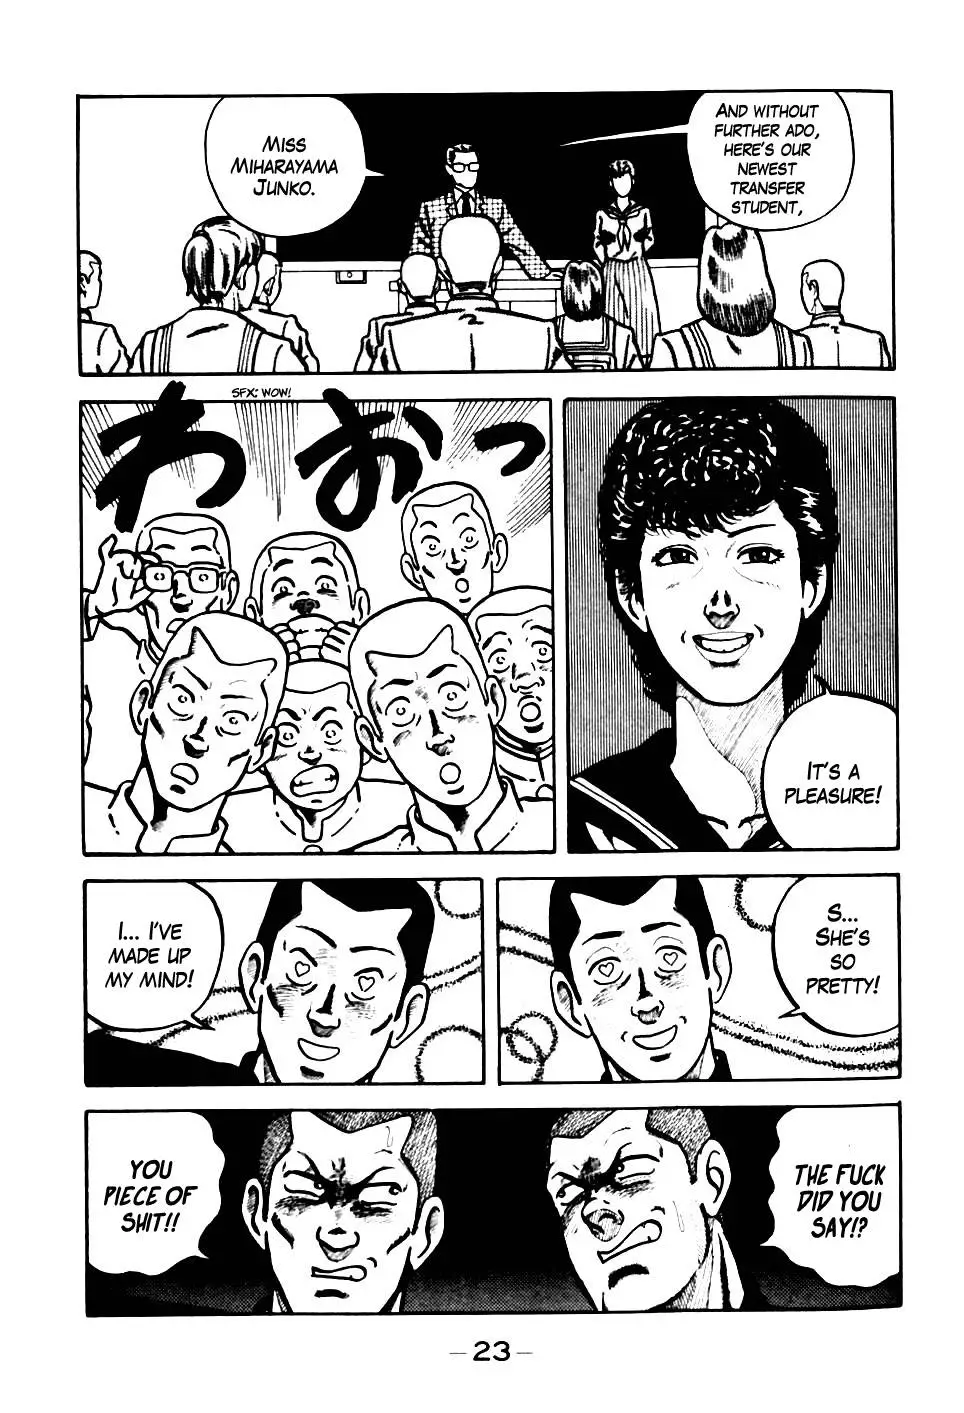 Be-Bop High School - 1 page p_00024